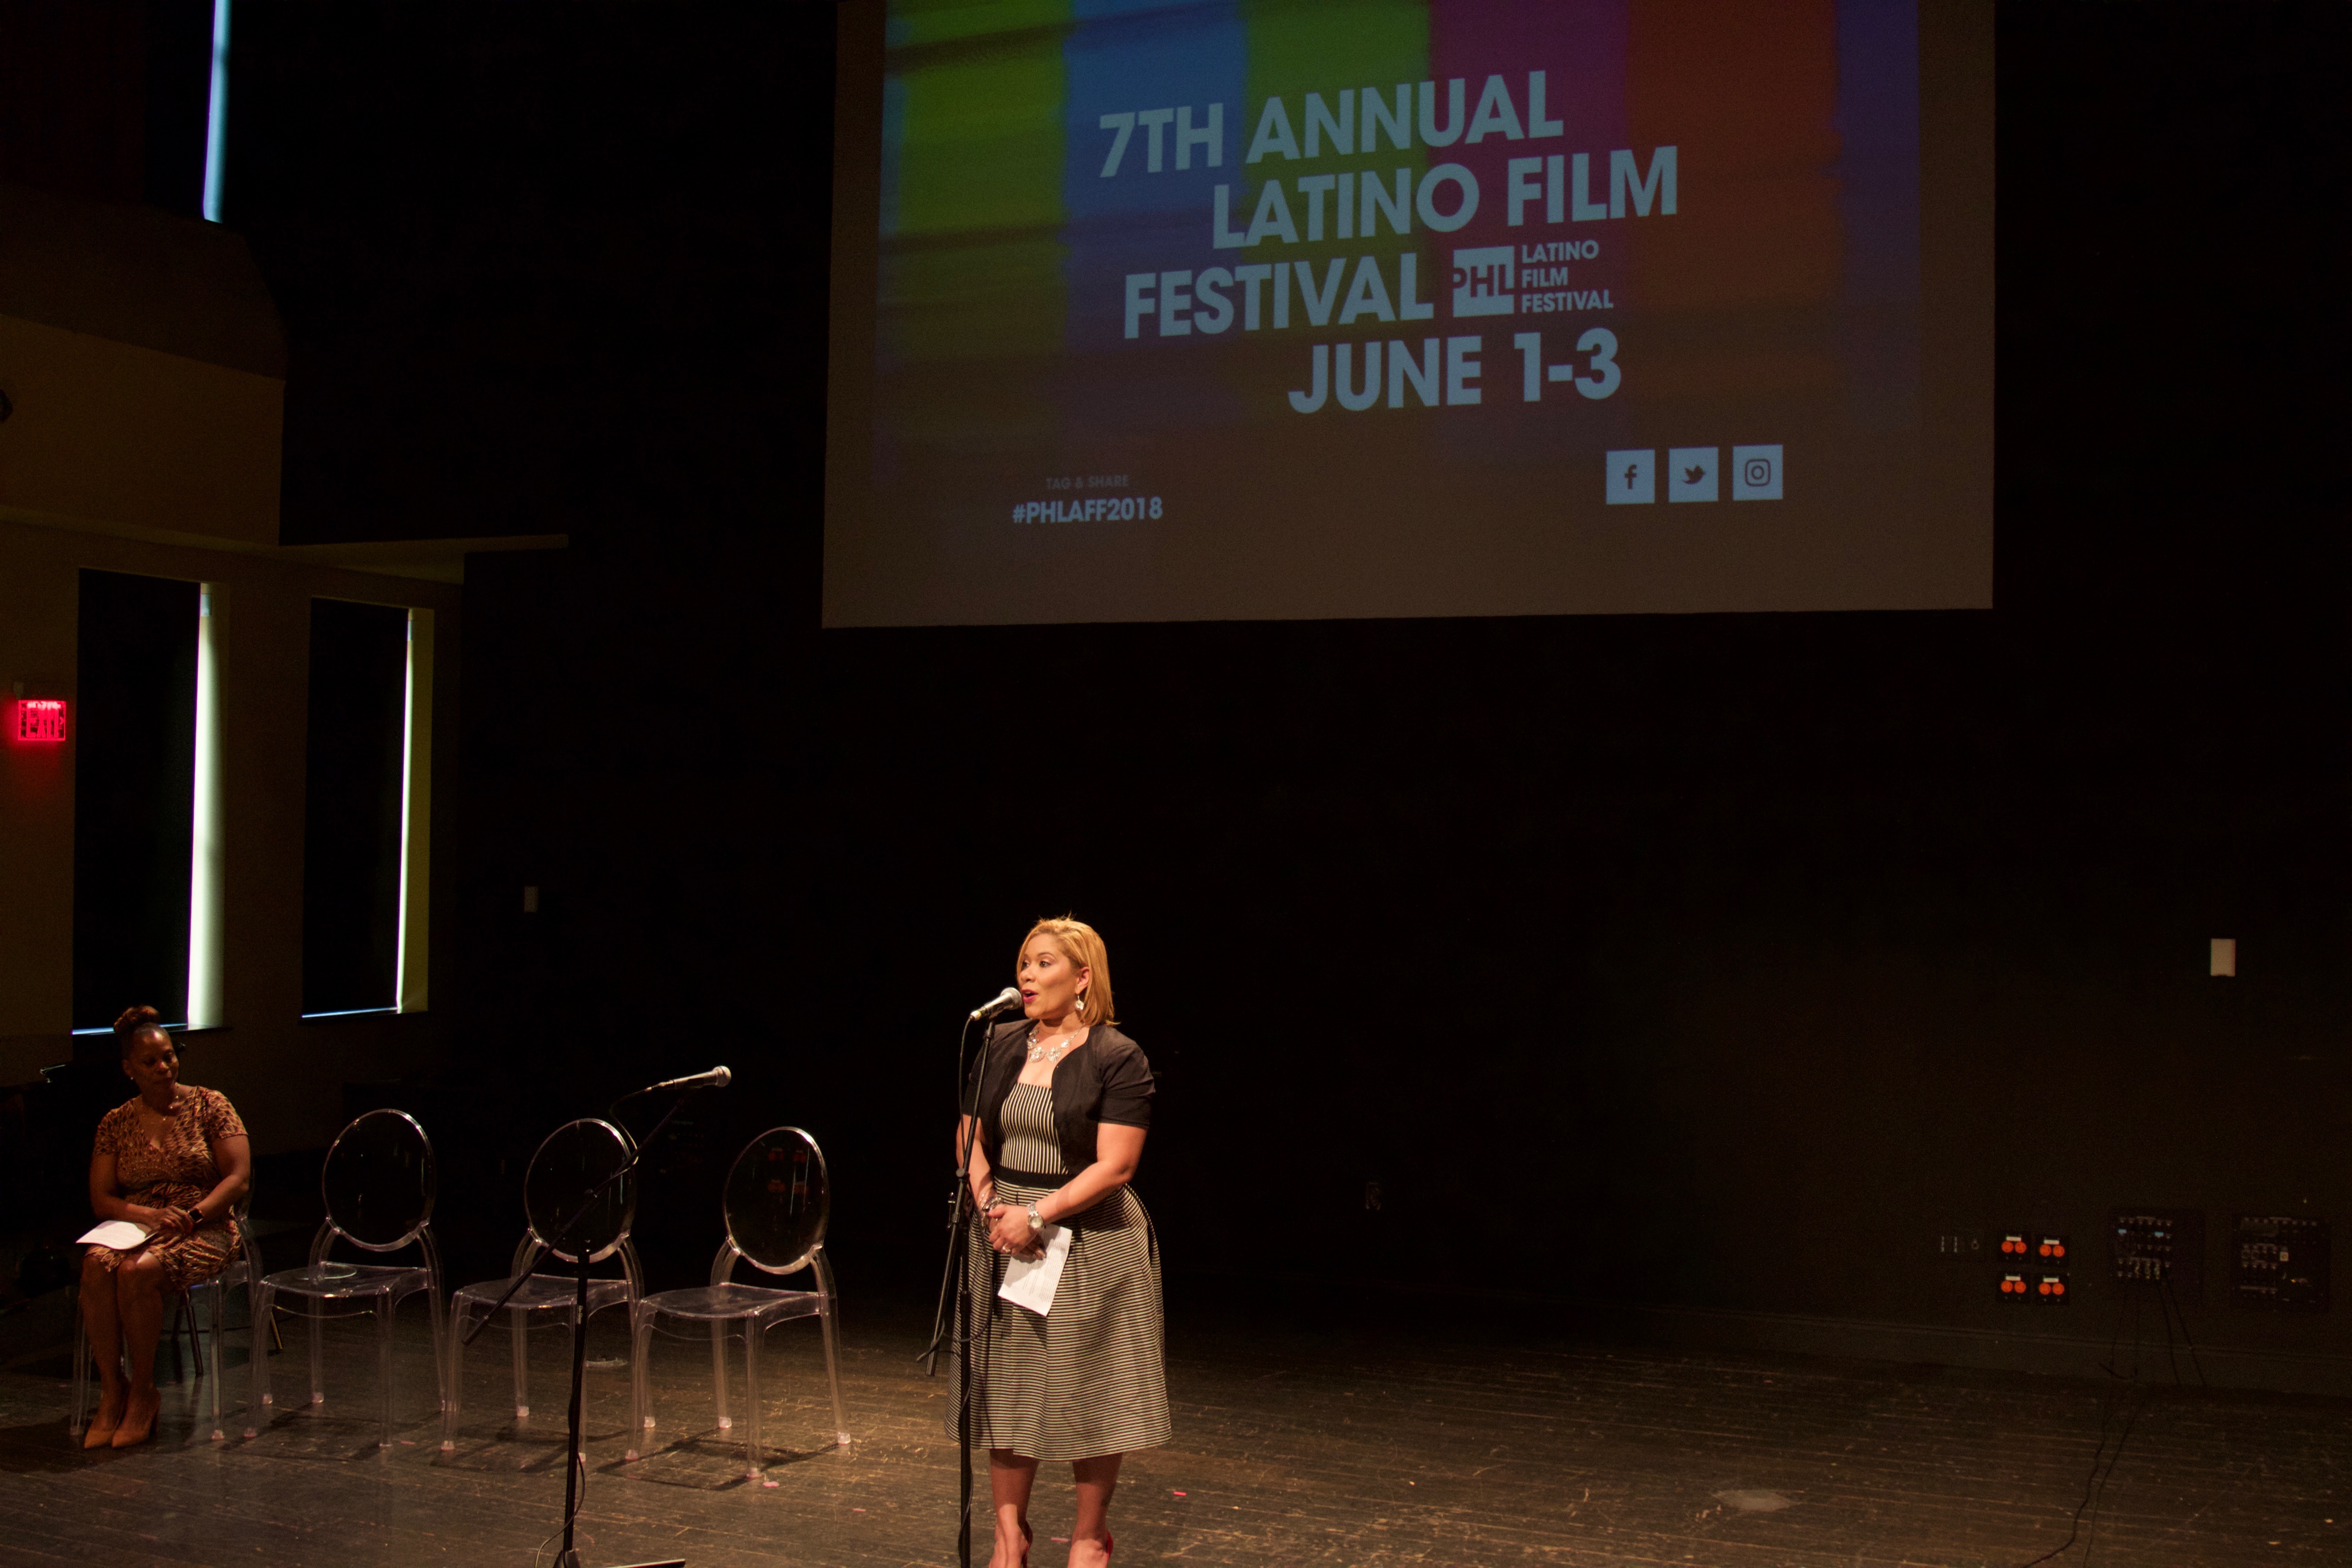 Joanna Otero-Cruz, Deputy Managing Director for the Community Services cabinet, spoke at the opening of the Philadelphia Latino Film Festival on Friday, June 1. Photo: Emily Neil / AL DÍA News